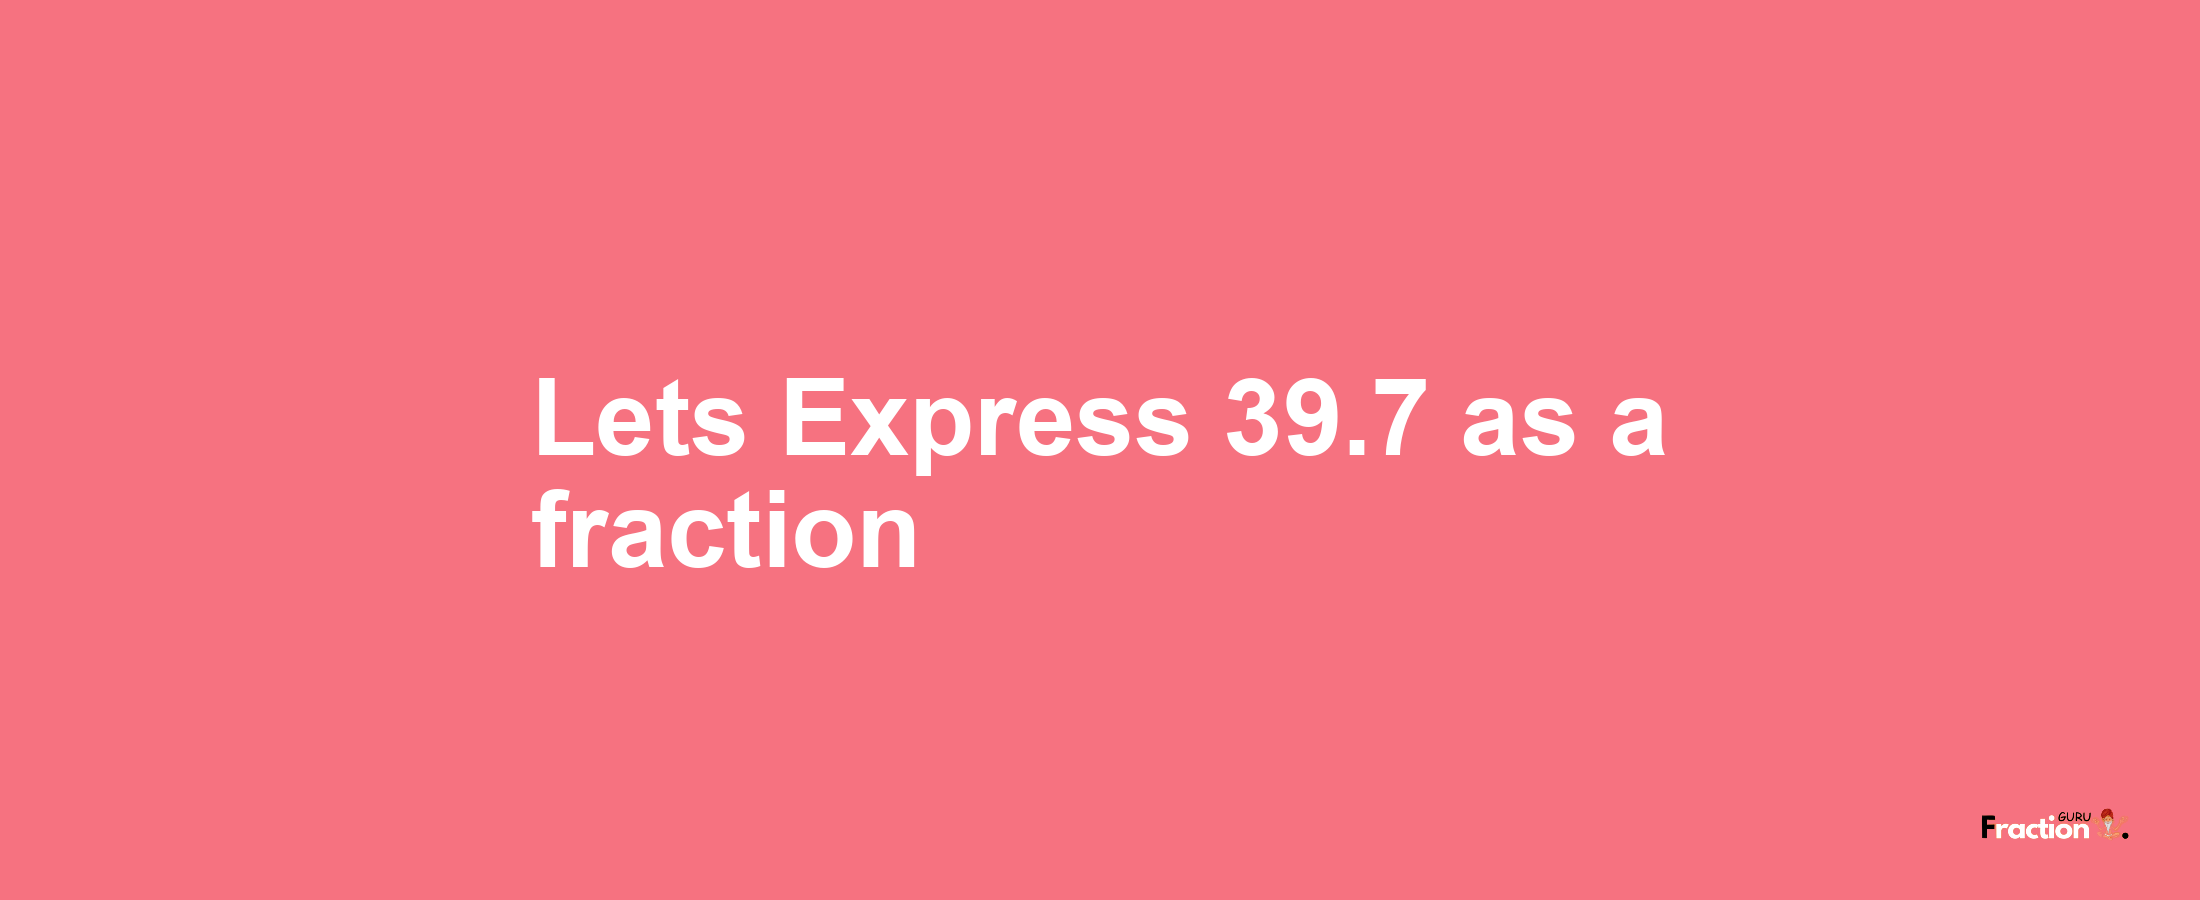 Lets Express 39.7 as afraction